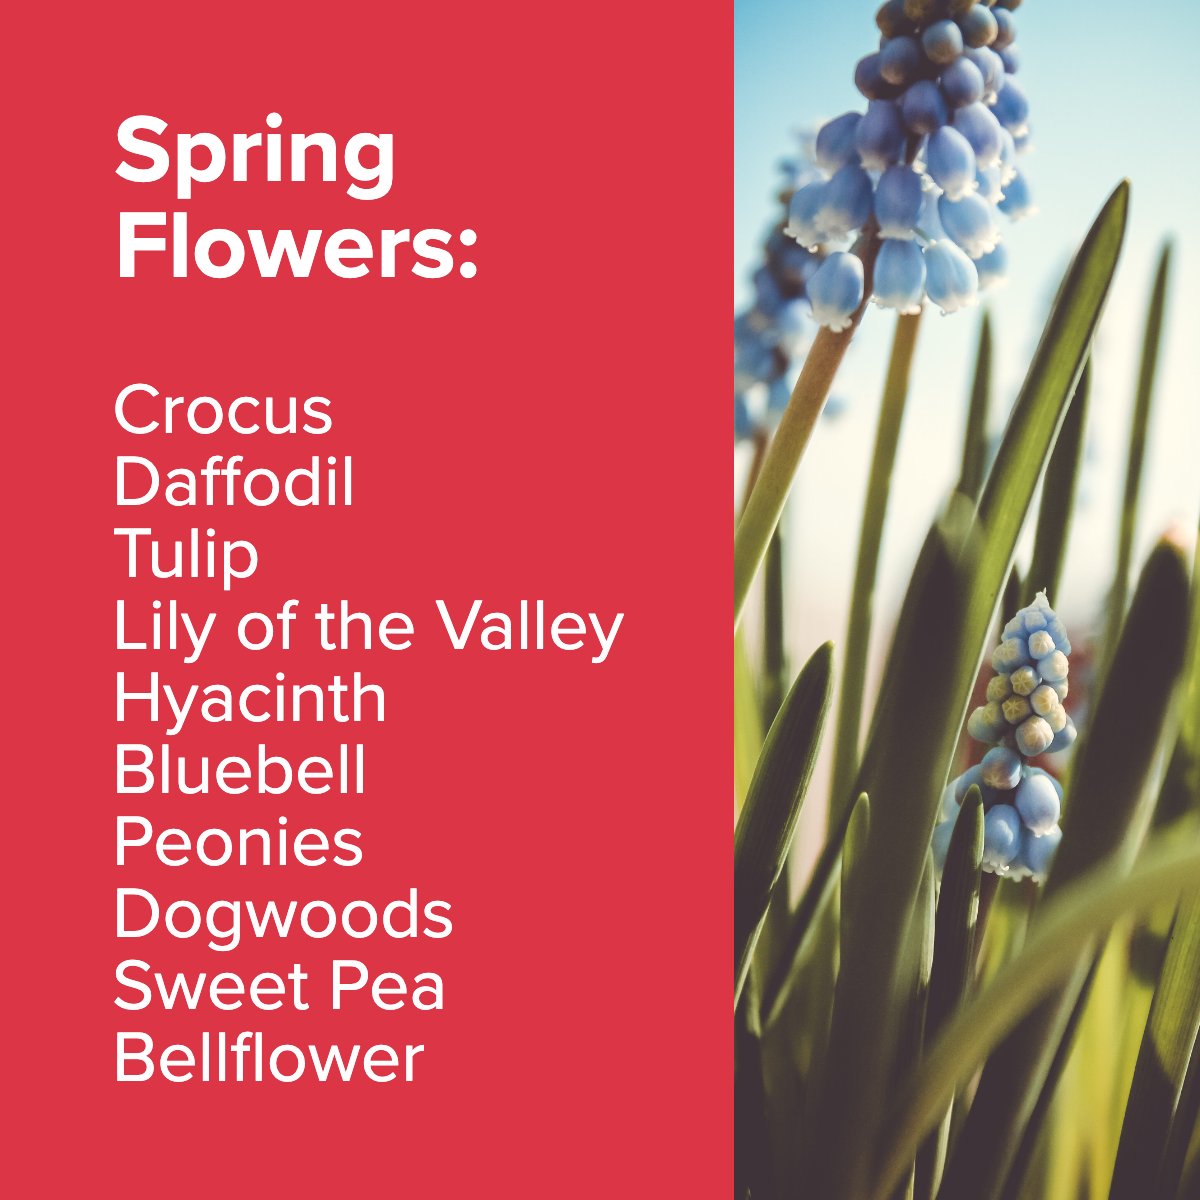 When spring arrives, why not welcome it with a garden full of blossoms to chase the winter blues away? 🌼🌺

#springflowers🌸    #flowersspringtime    #lovespringflowers    #springflowersblooming
# #realestate #realtor #forsale #newhome #househunting #renatashomes